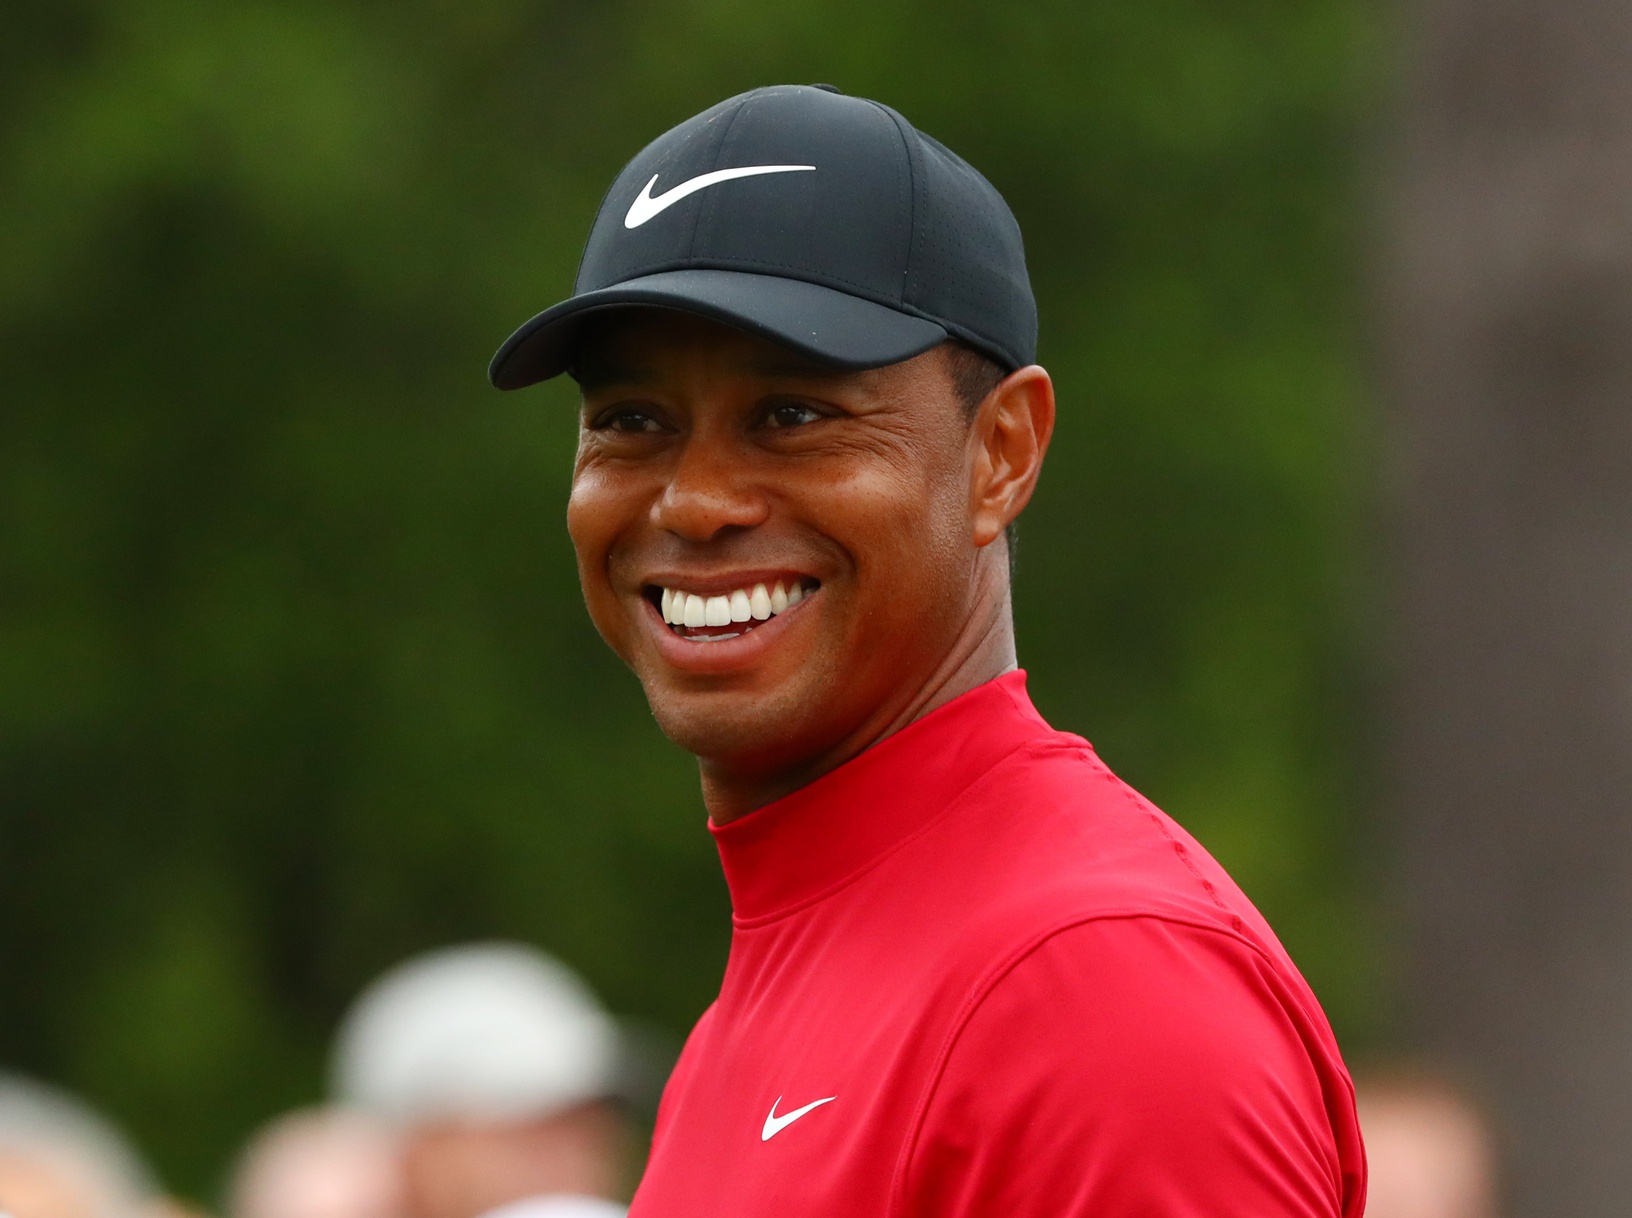 The tiger woods foundation has reached millions of young people by deliveri...